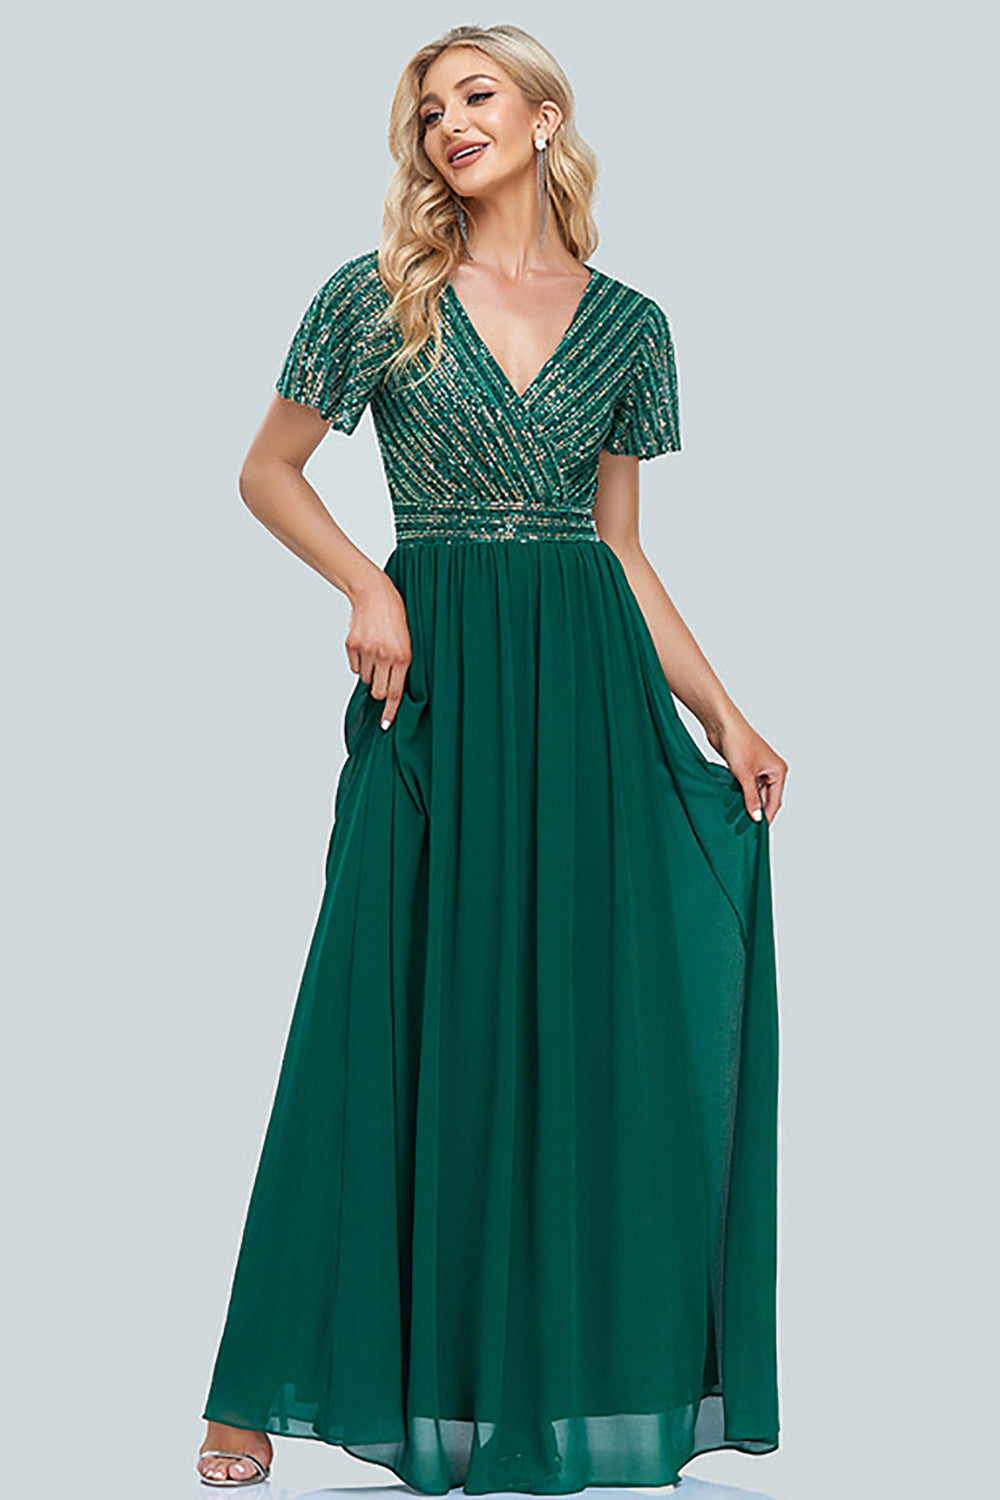 Sparkly Green Chiffon Beaded Mother of the Bride Dress